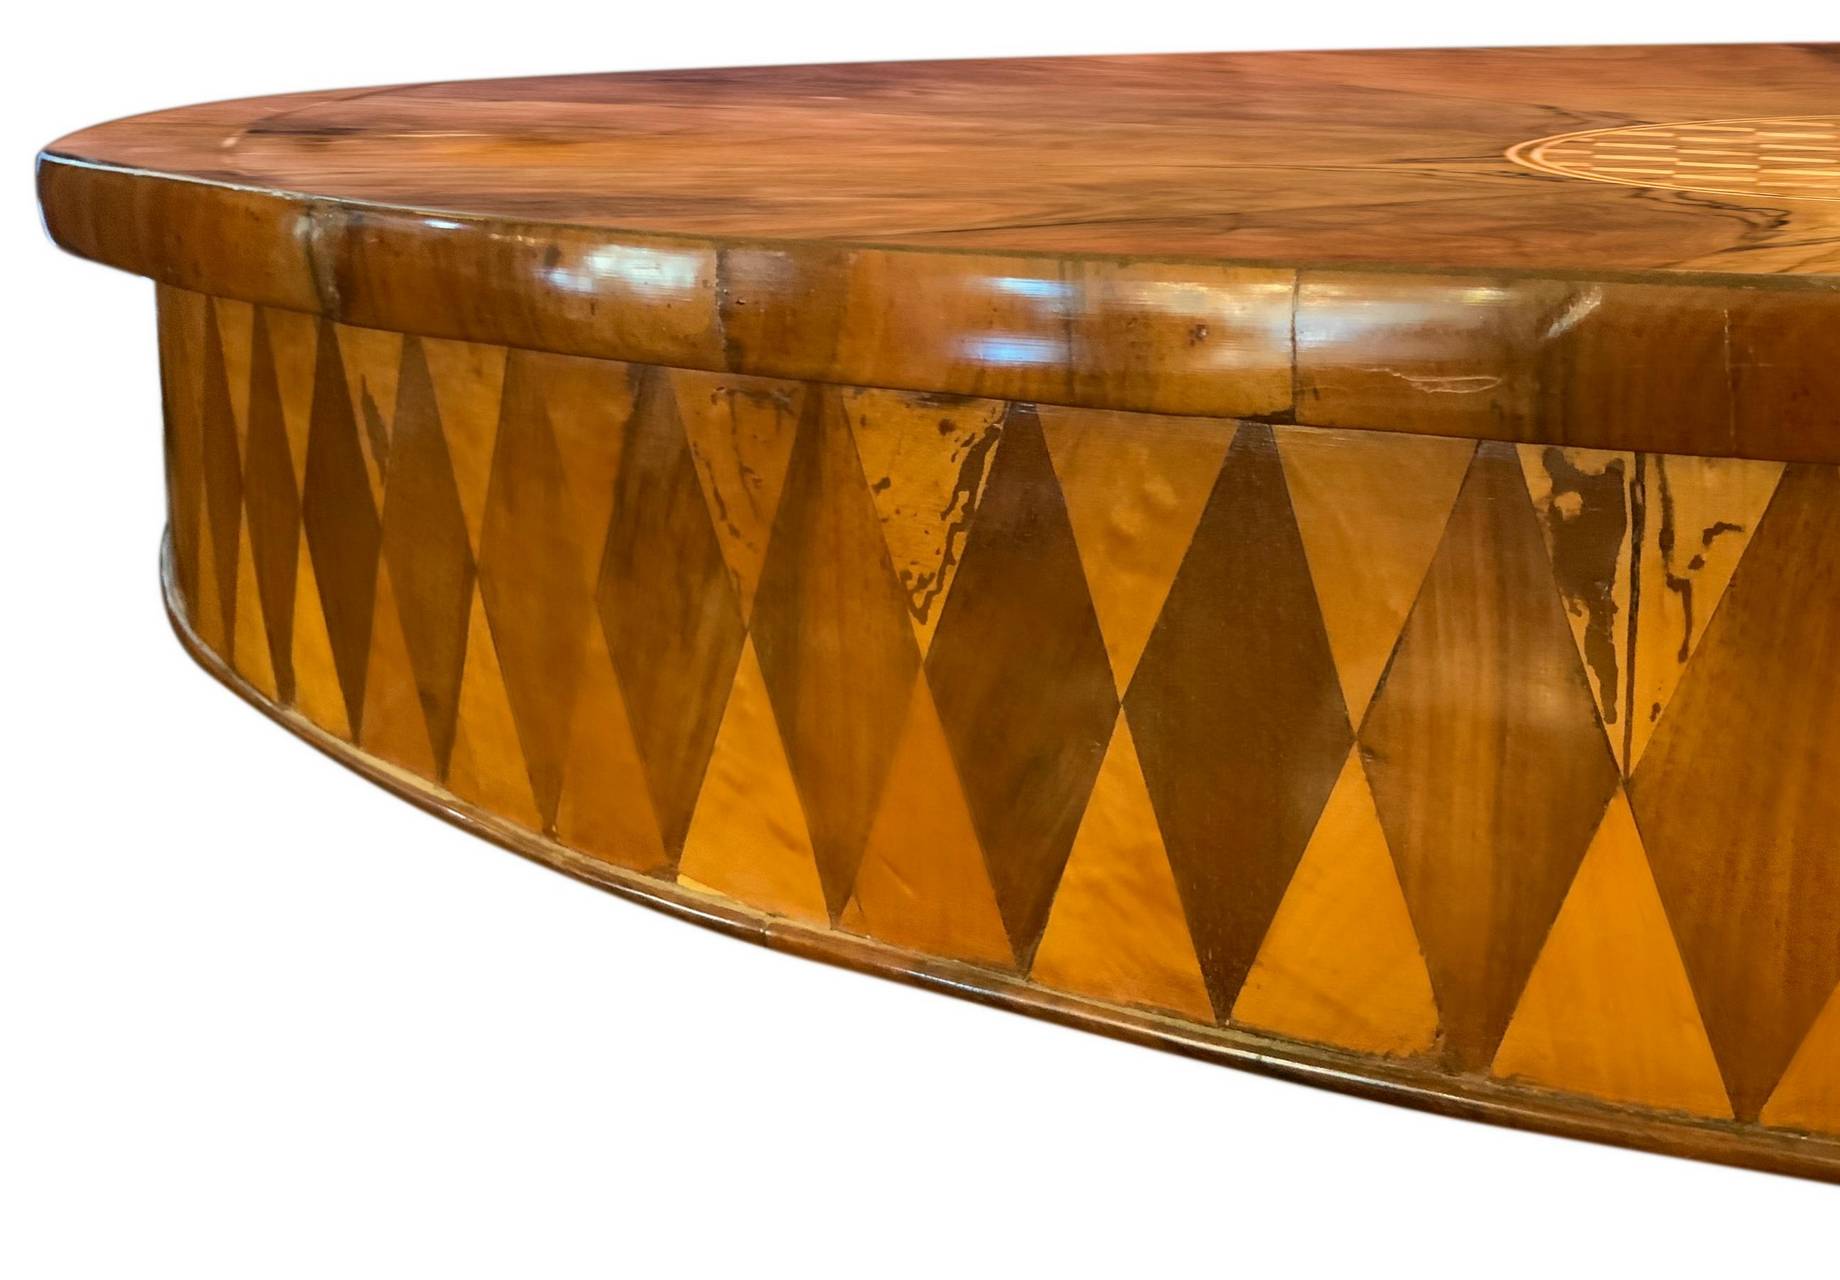 Elegant Round center table with inlaid surface and leaps subgrade, Sicilian manufacture, half of the - Image 4 of 5